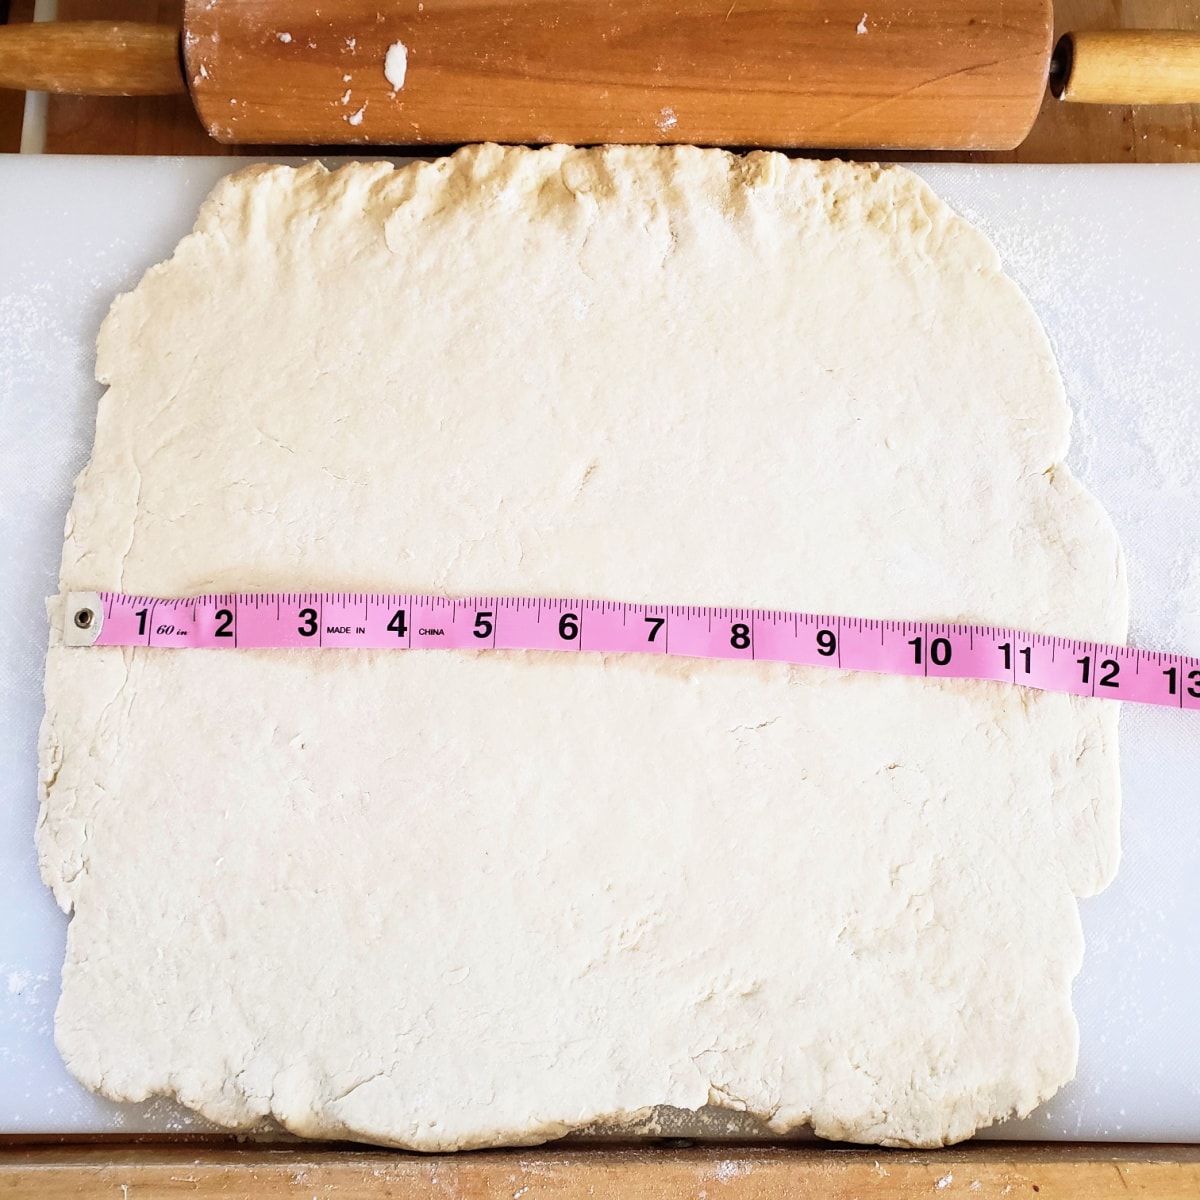 Dough rolled out square with a pink tape measure across it and a rolling pin above it